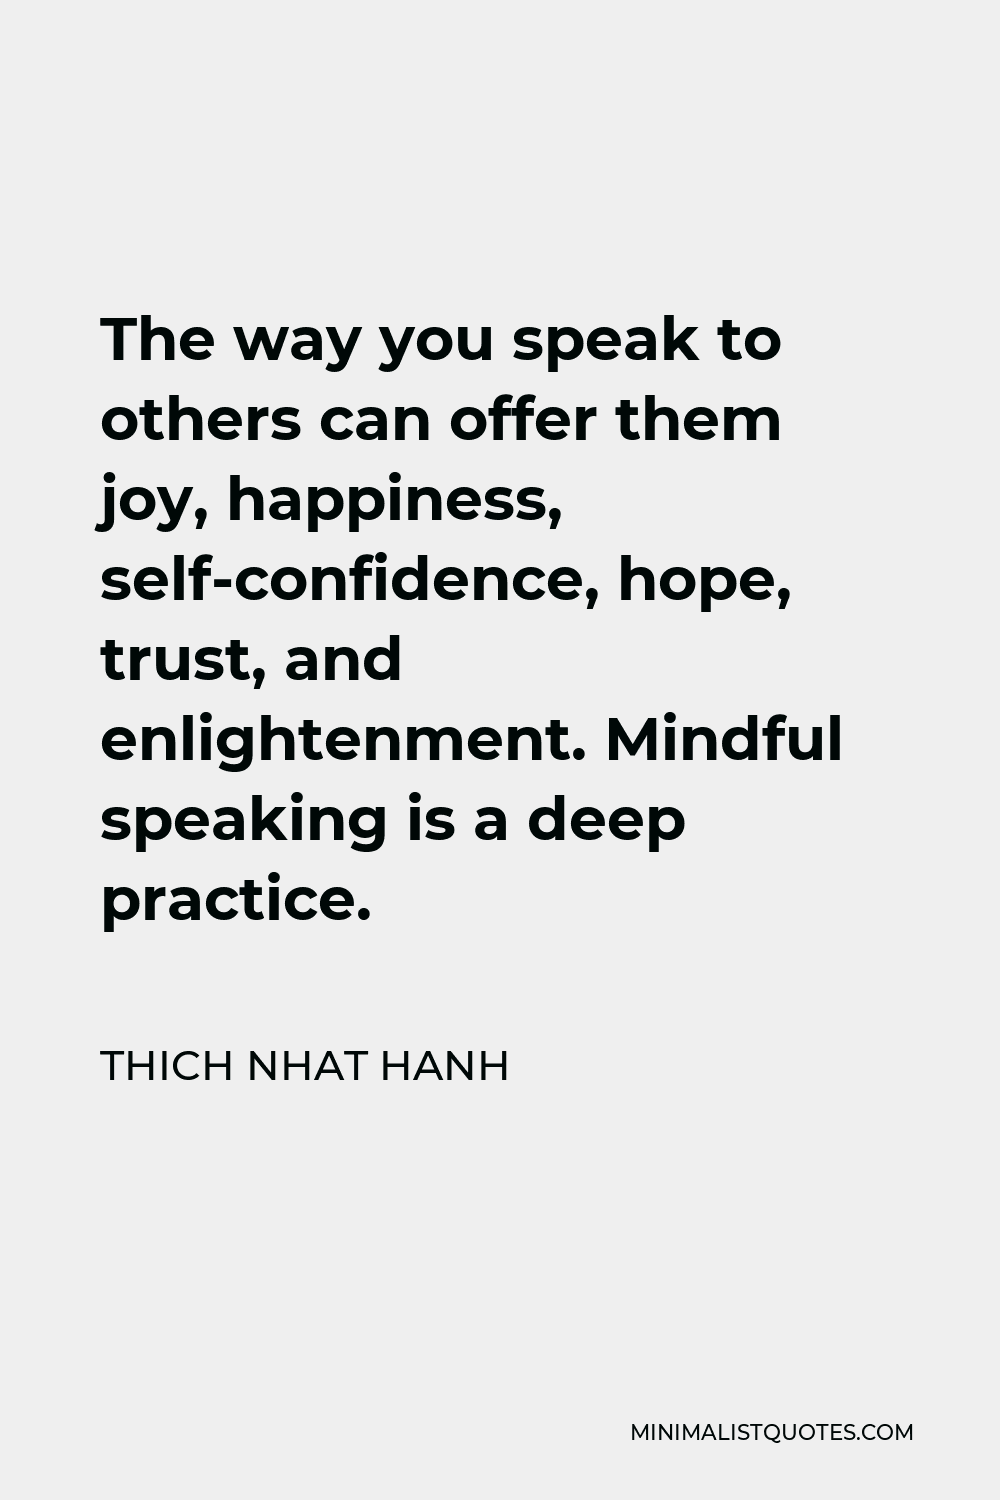 Thich Nhat Hanh Quote - The way you speak to others can offer them joy, happiness, self-confidence, hope, trust, and enlightenment. Mindful speaking is a deep practice.